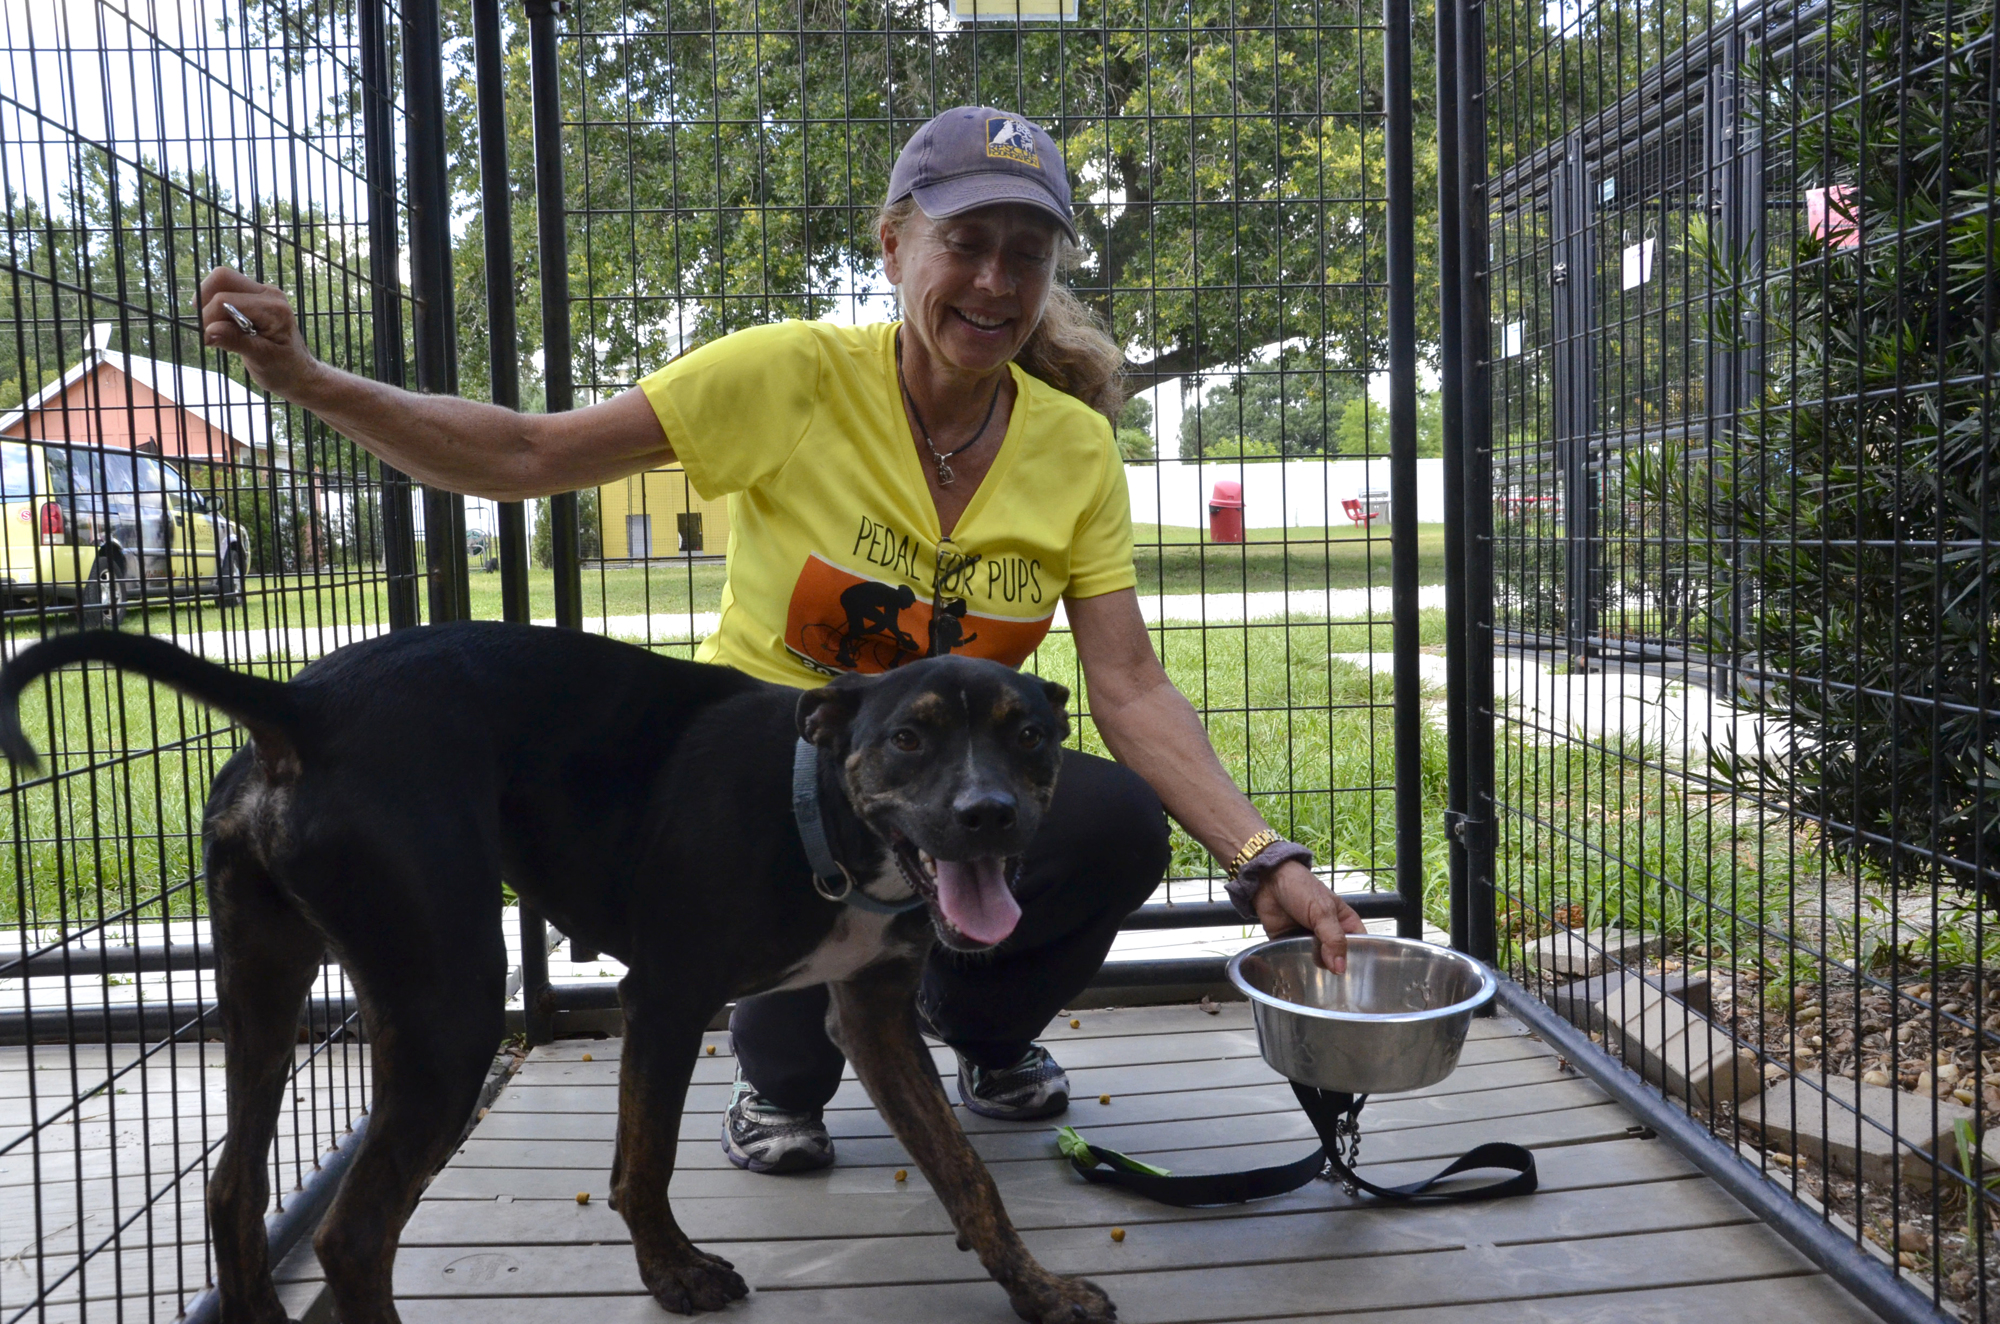 Sylvia McNichol helps feed the dogs in the cottages. Photo by Jessica Salmond